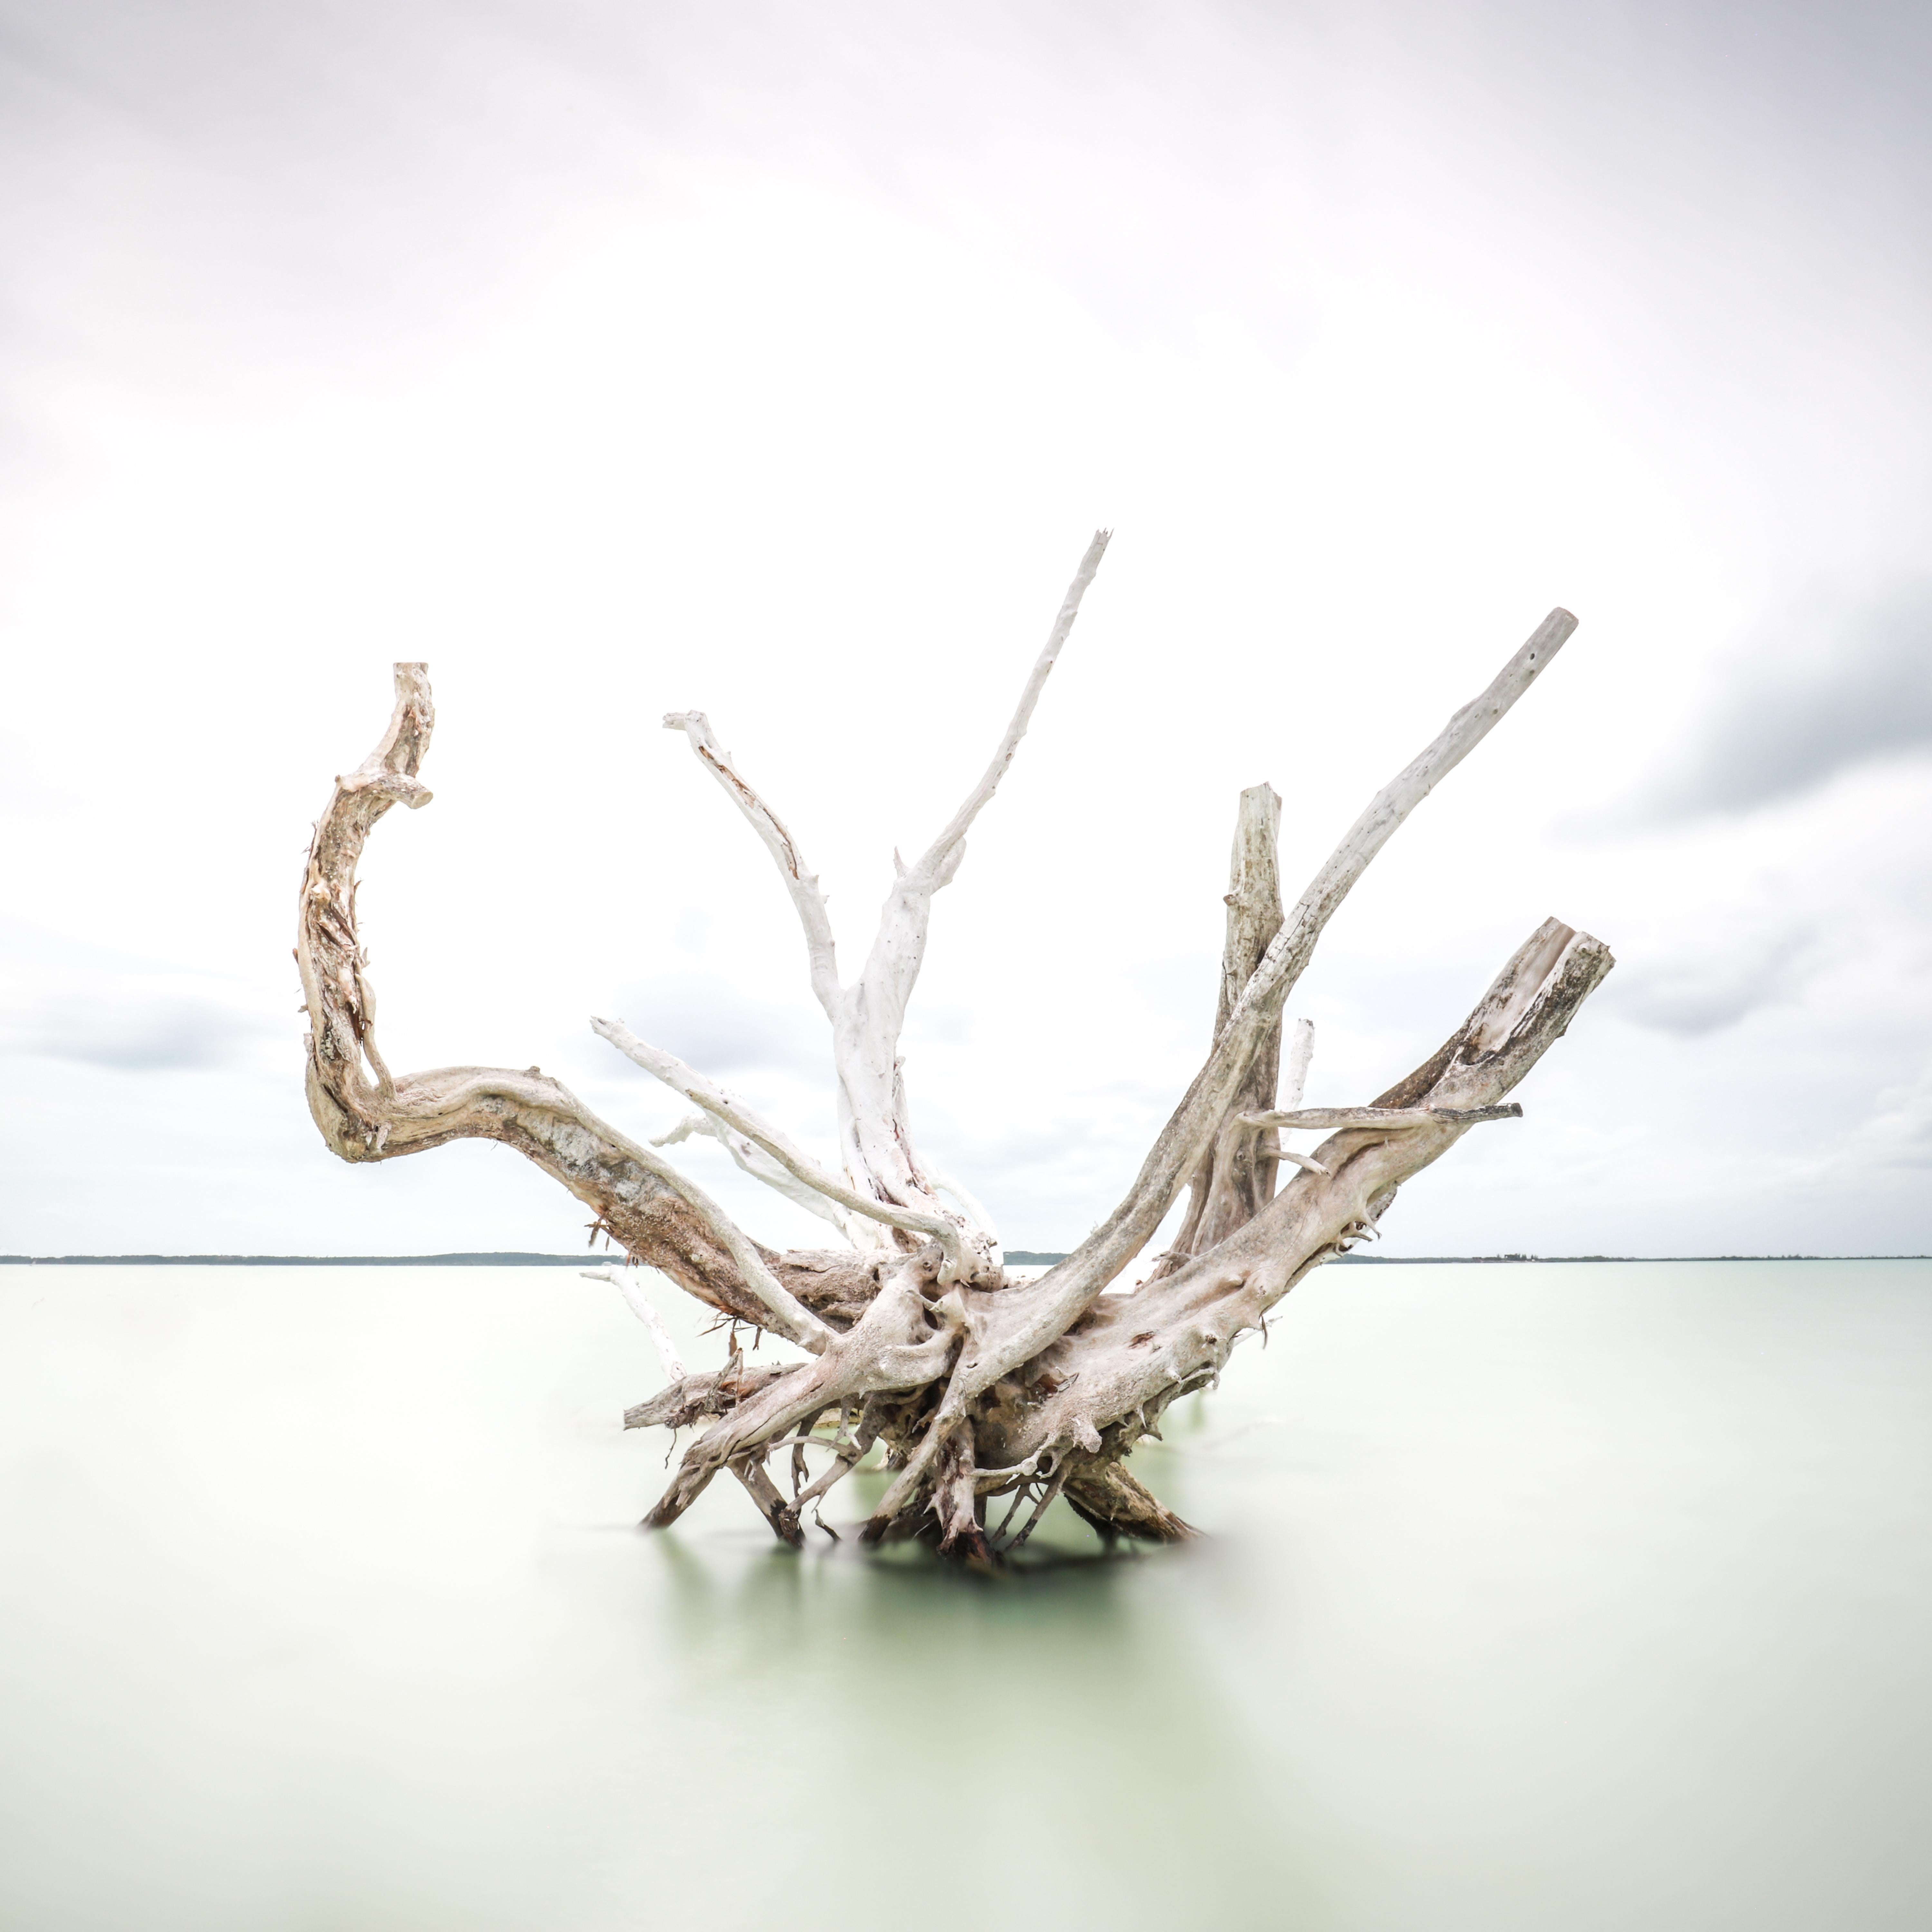 Keith Ramsdell Color Photograph - Driftwood at Harbour Island 60x60